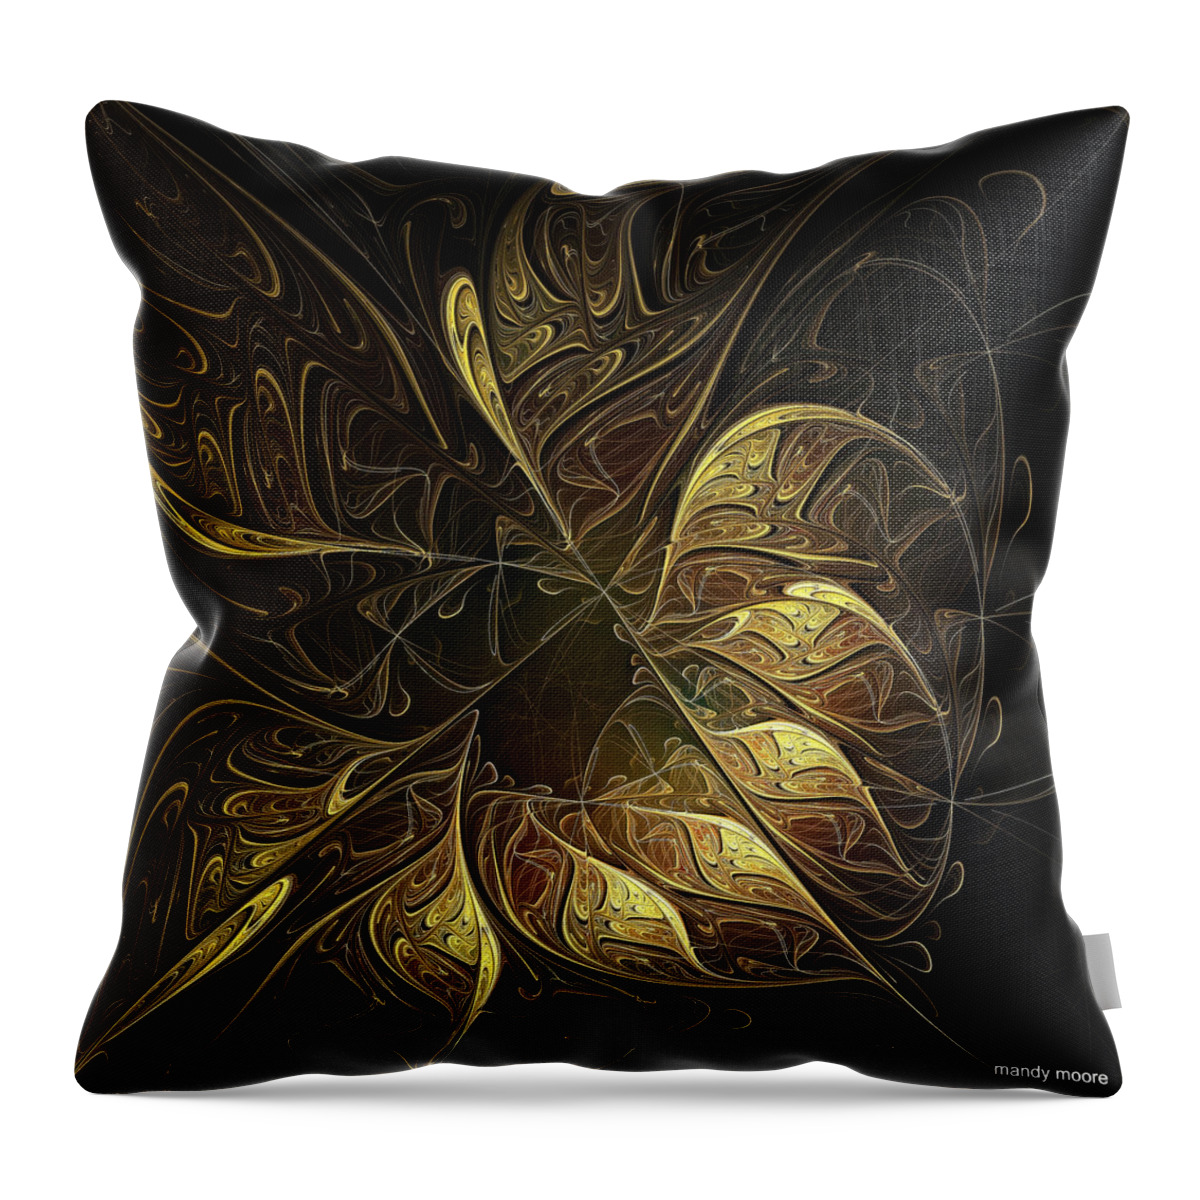 Digital Art Throw Pillow featuring the digital art Carved in gold by Amanda Moore